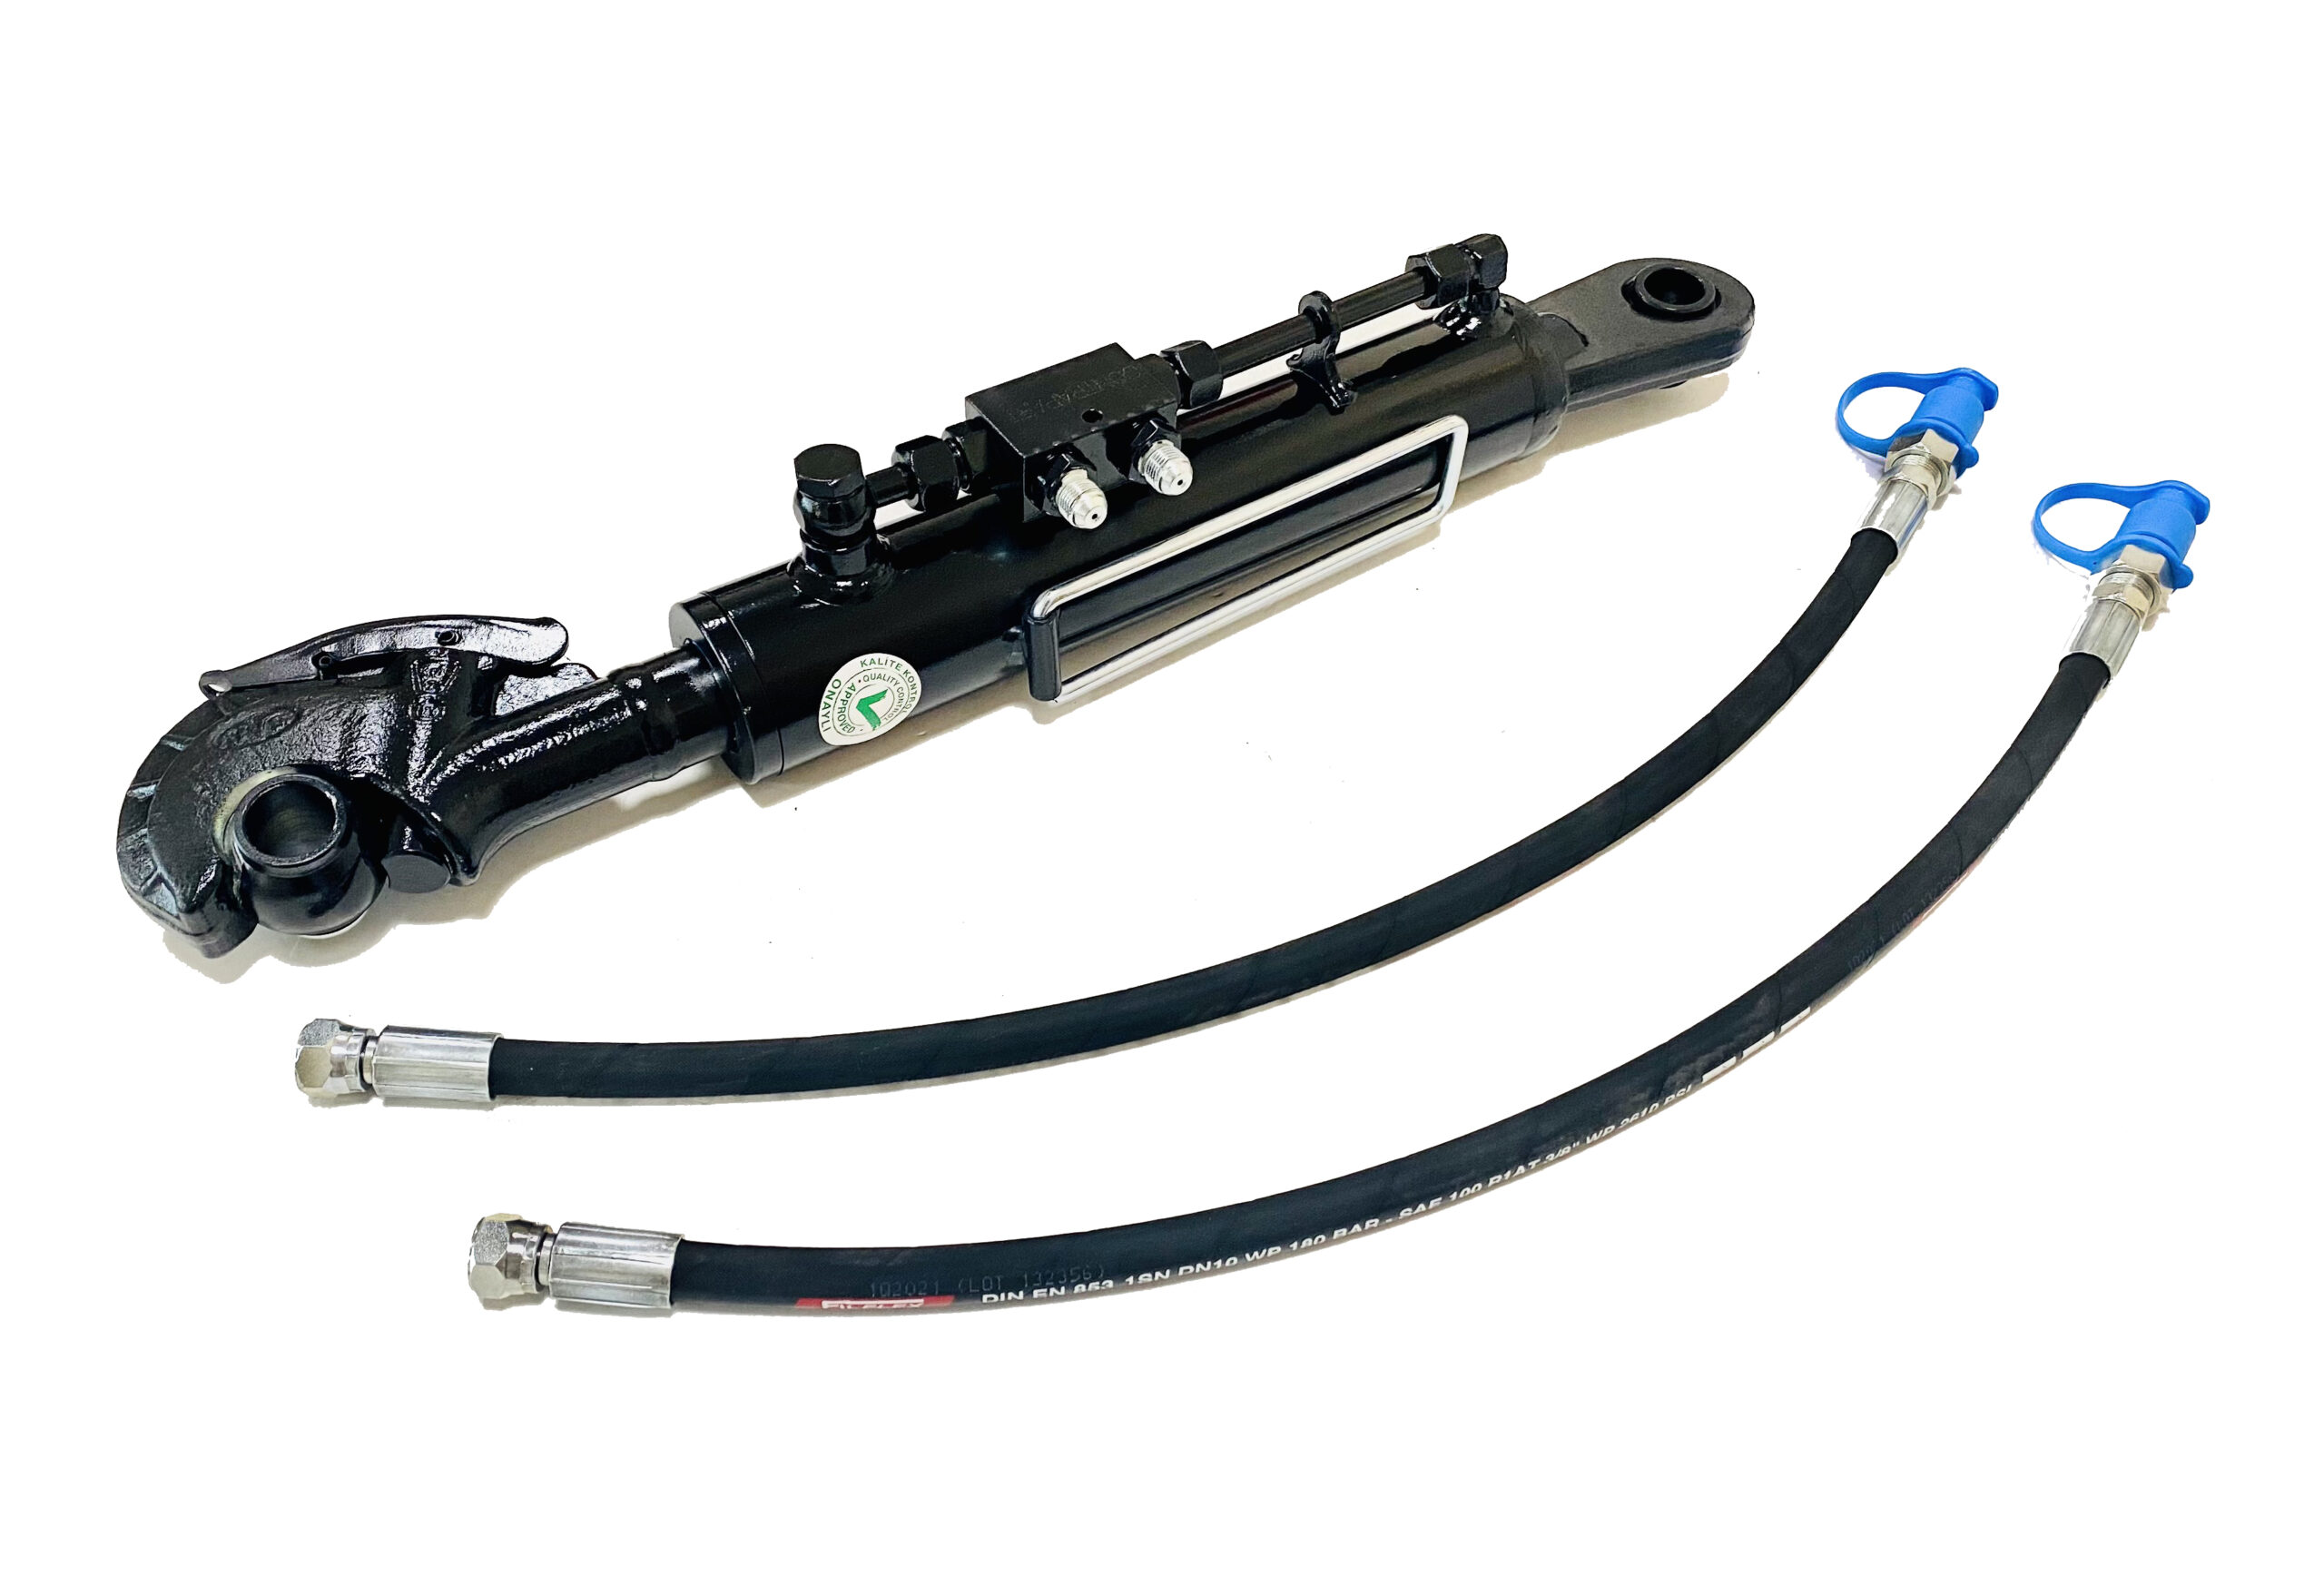 Hydraulic Top Link Cat. 2-2 (19-5/8″”- 25/3/4″) with Hook, Locking Block and 2 x Hoses – Stroke 6 1/8″